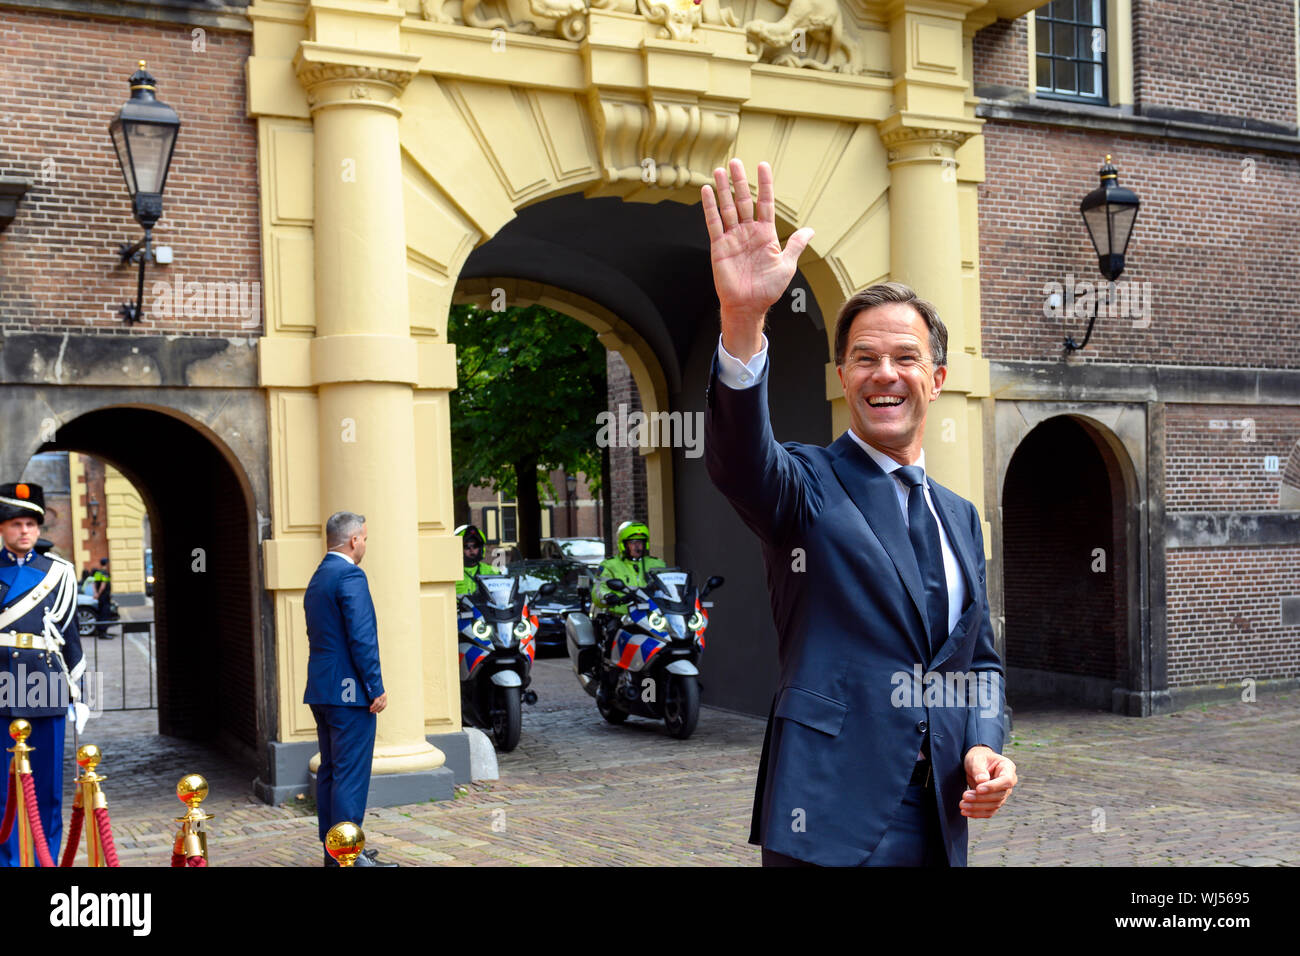 The Hague, Netherlands September 3rd, 2019 - Prime Minister Mark Rutte will receive Greek Prime Minister Kyriákos Mitsotákis for an introduction to the Ministry of General Affairs. The two heads of government first meet in the Torentje, followed by a wider delegation meeting during a working lunch in the Statenzaal. The agenda includes bilateral relations between Greece and the Netherlands, the reform program of the new Greek government, migration and current events on the European agenda. After that they have the Press Conference. Stock Photo